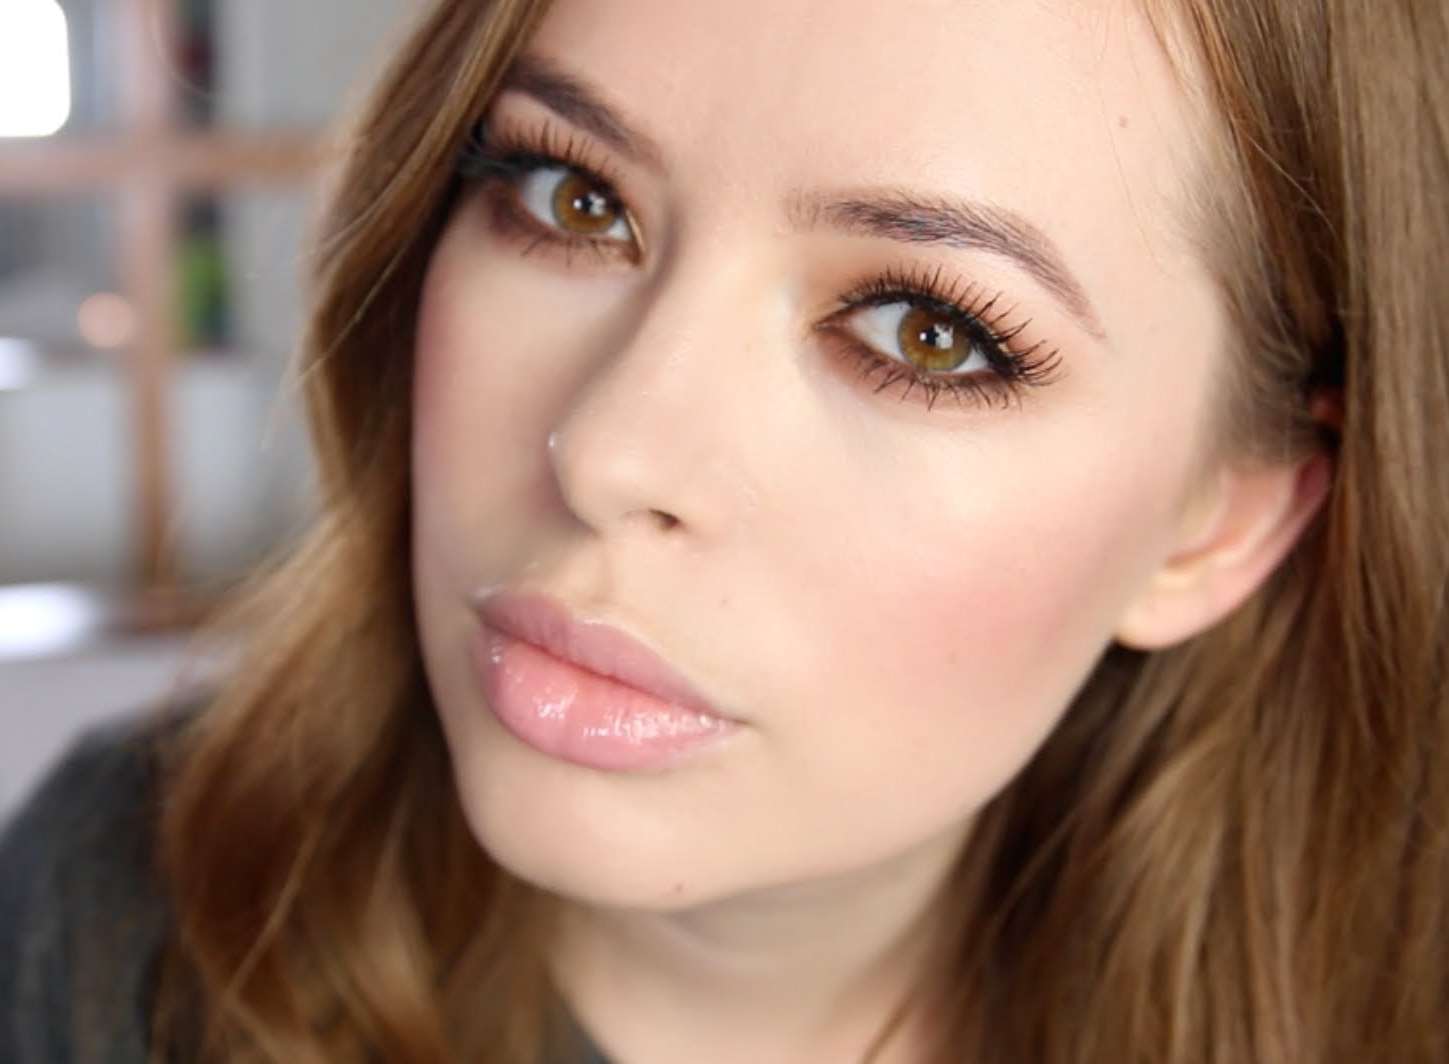 Tanya Burr will be signing copies of her cookbook at Bluewater